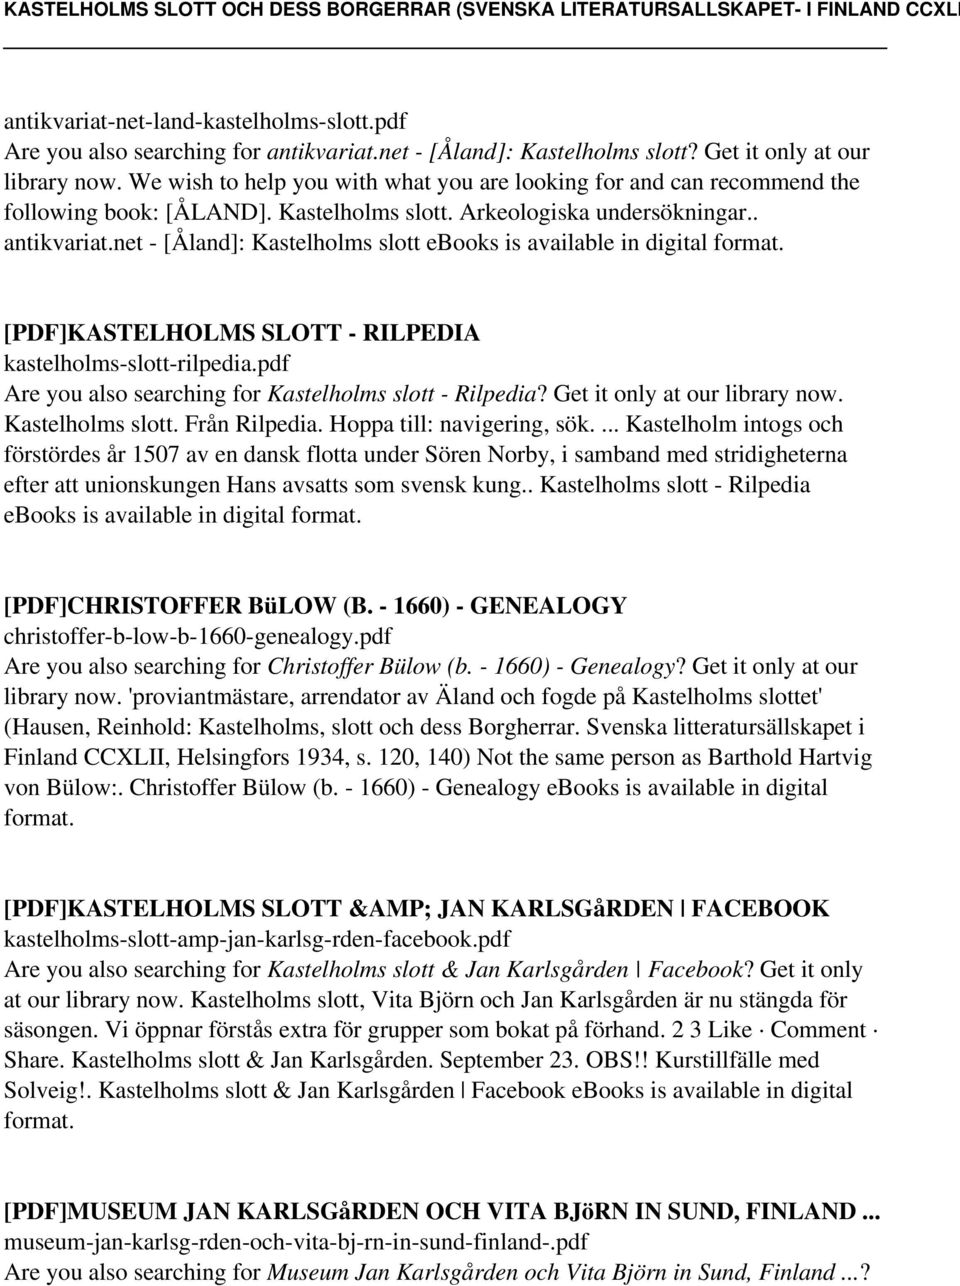 net - [Åland]: Kastelholms slott ebooks is [PDF]KASTELHOLMS SLOTT - RILPEDIA kastelholms-slott-rilpedia.pdf Are you also searching for Kastelholms slott - Rilpedia? Get it only at our library now.